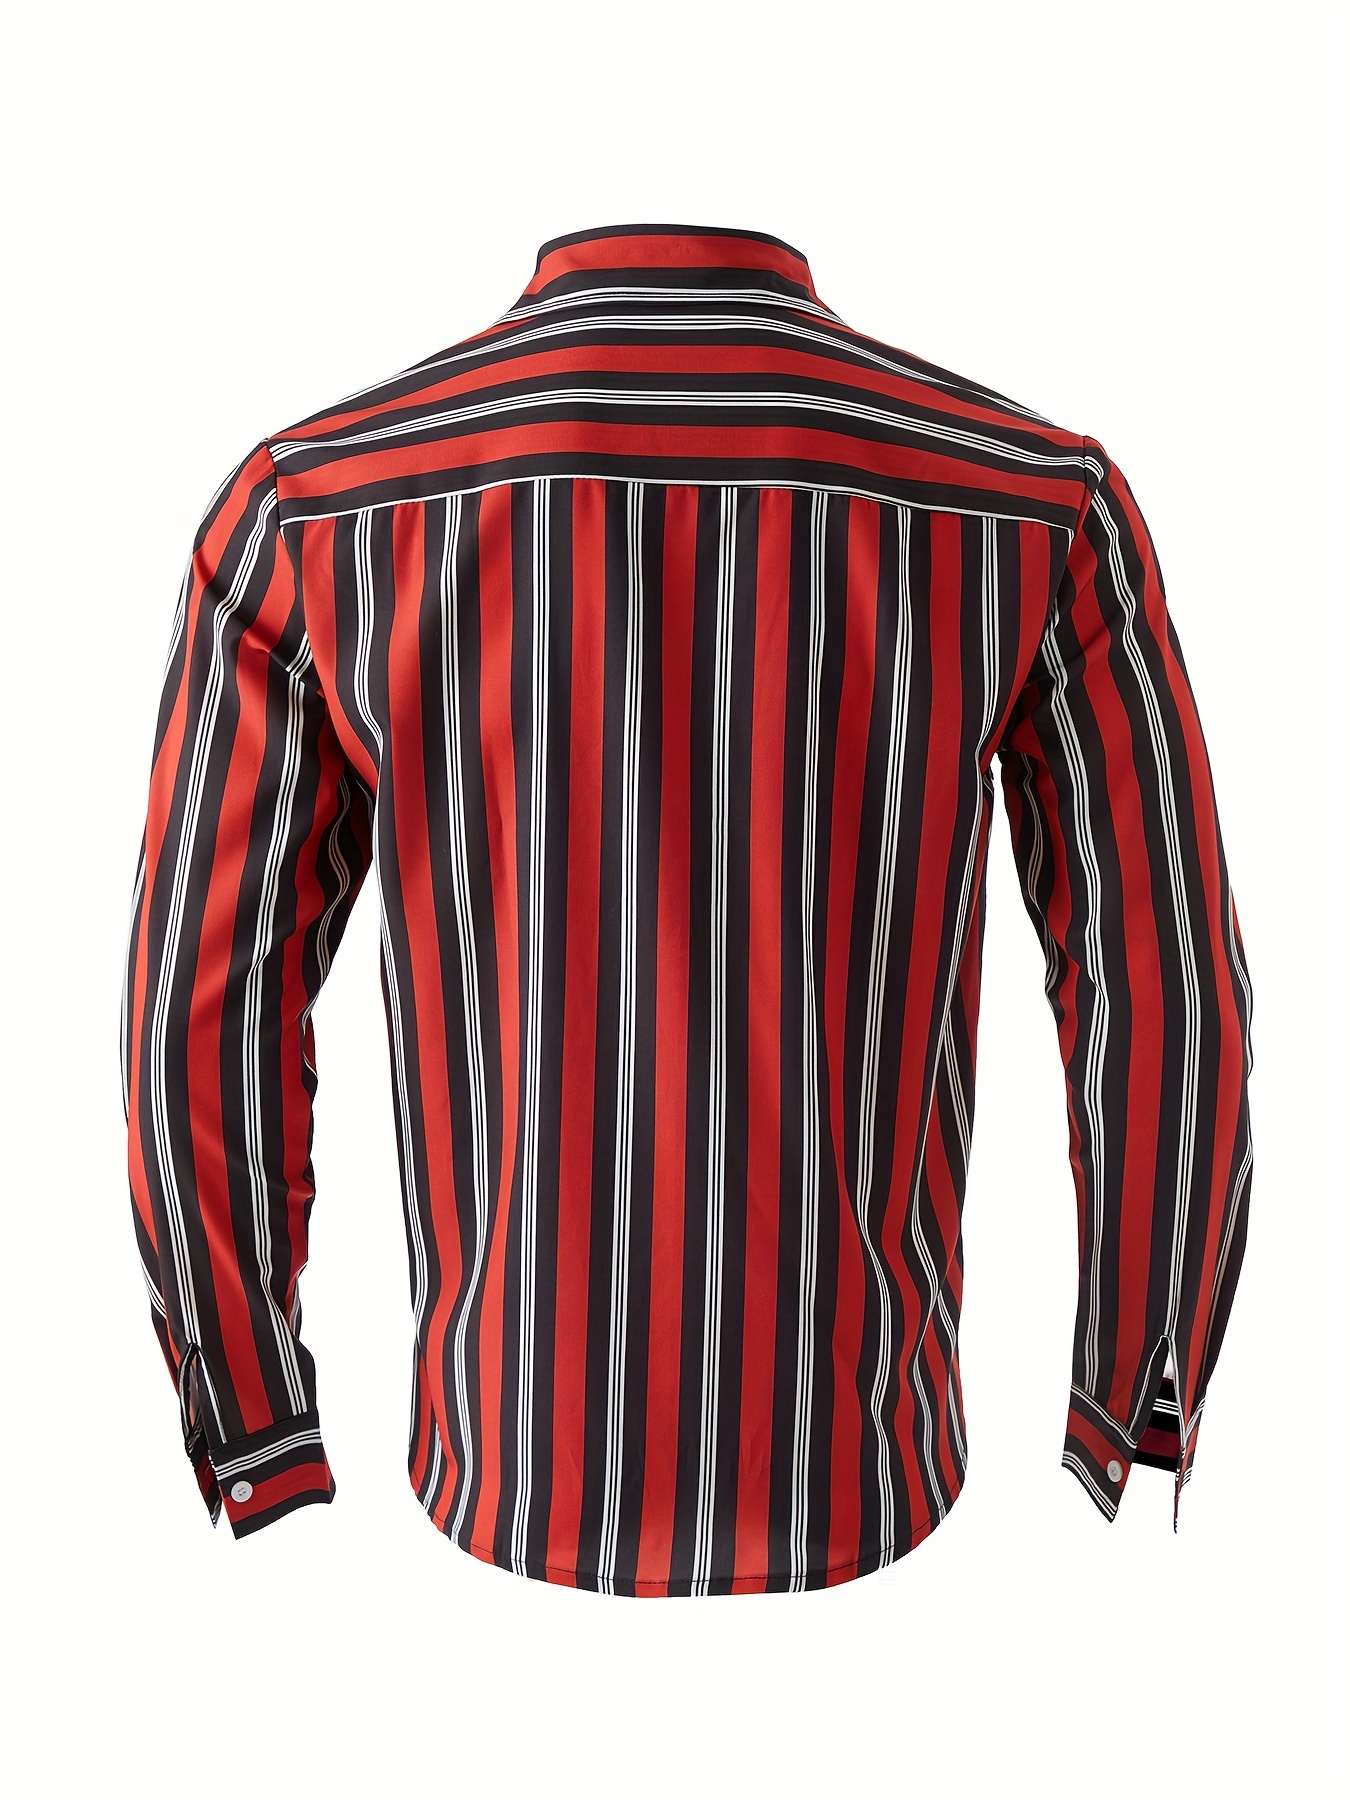 mens classic design striped long sleeve button up shirt for business occasions spring fall mens clothing details 21